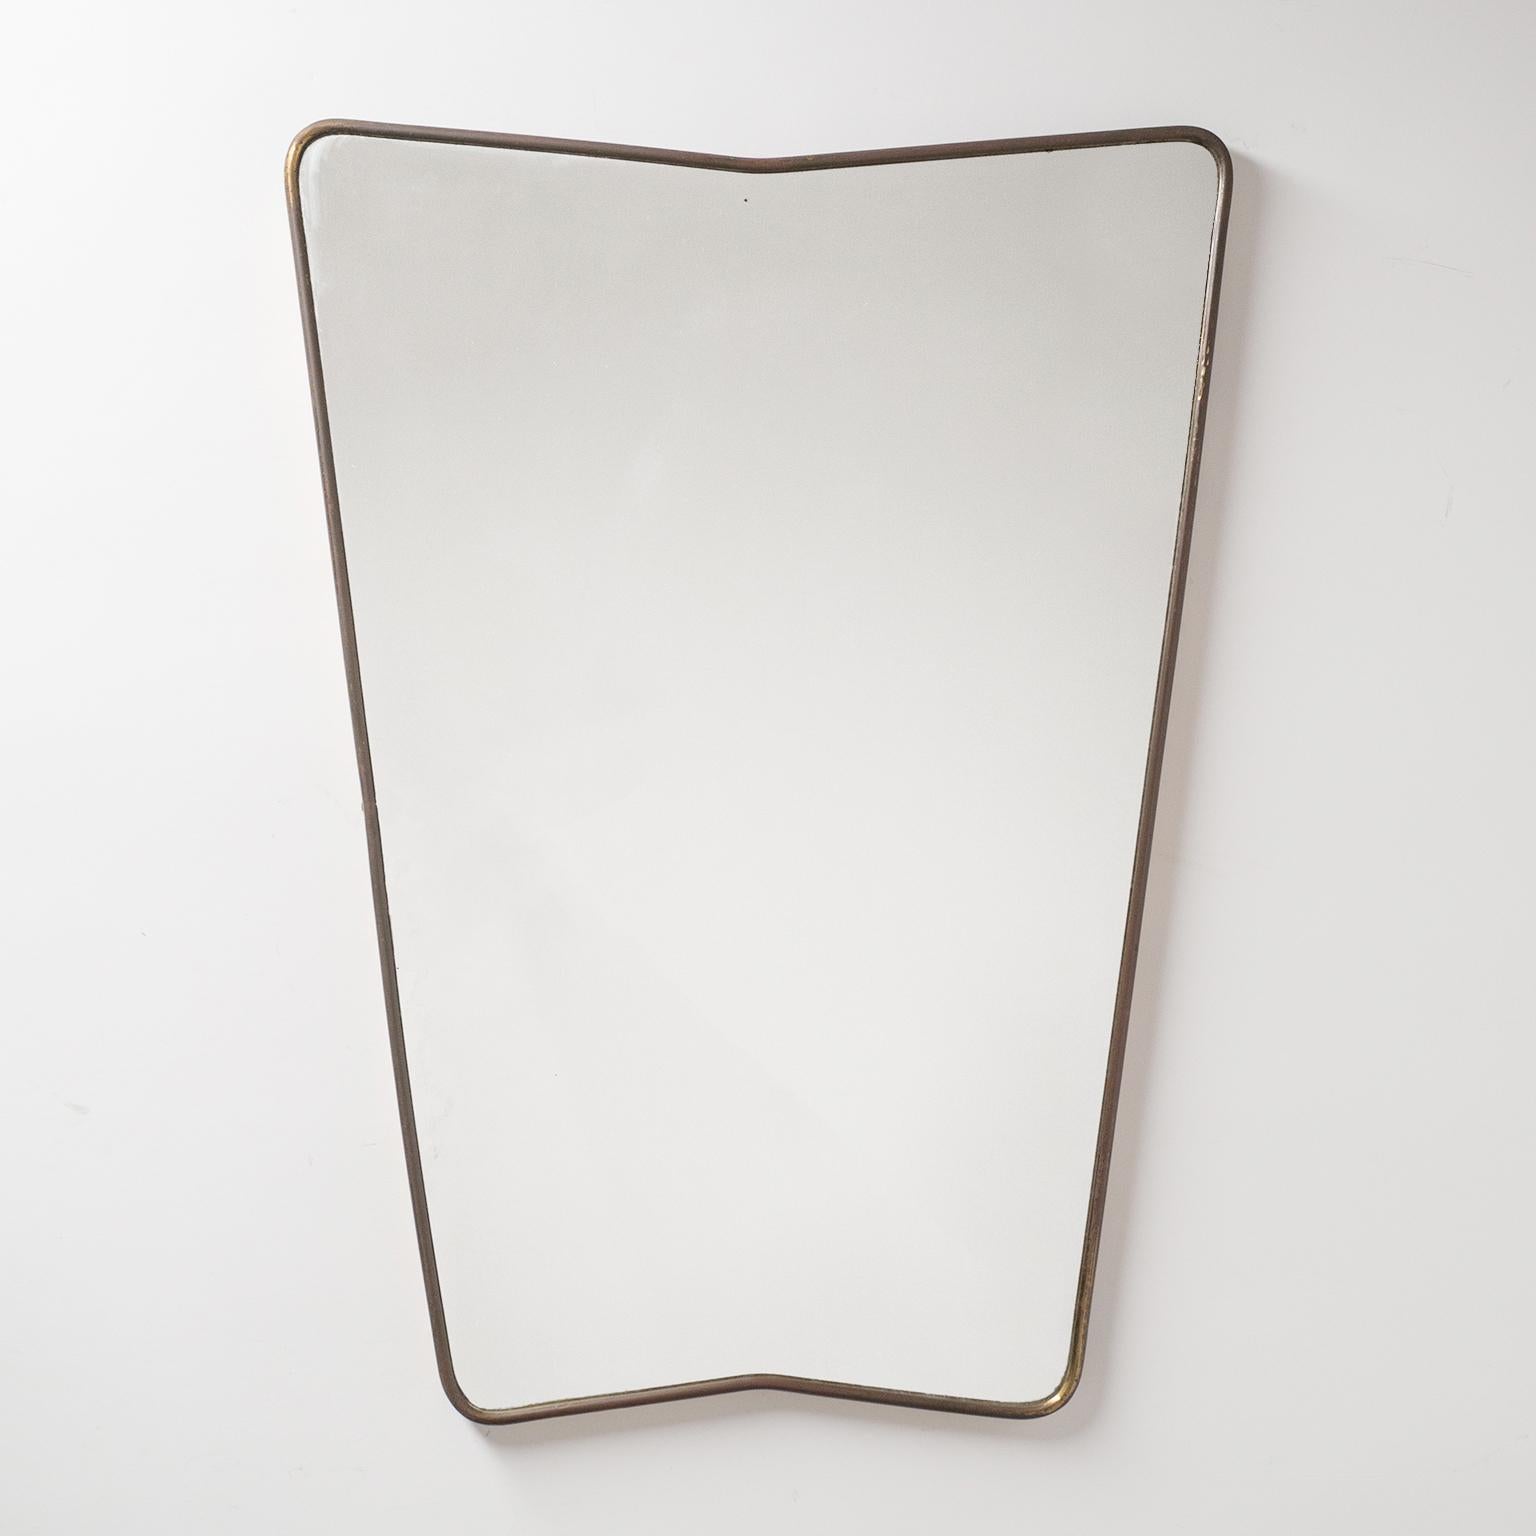 Fine Italian mirror from the 1940-1950s. Continuous brass frame with an unusual trapeze shape.